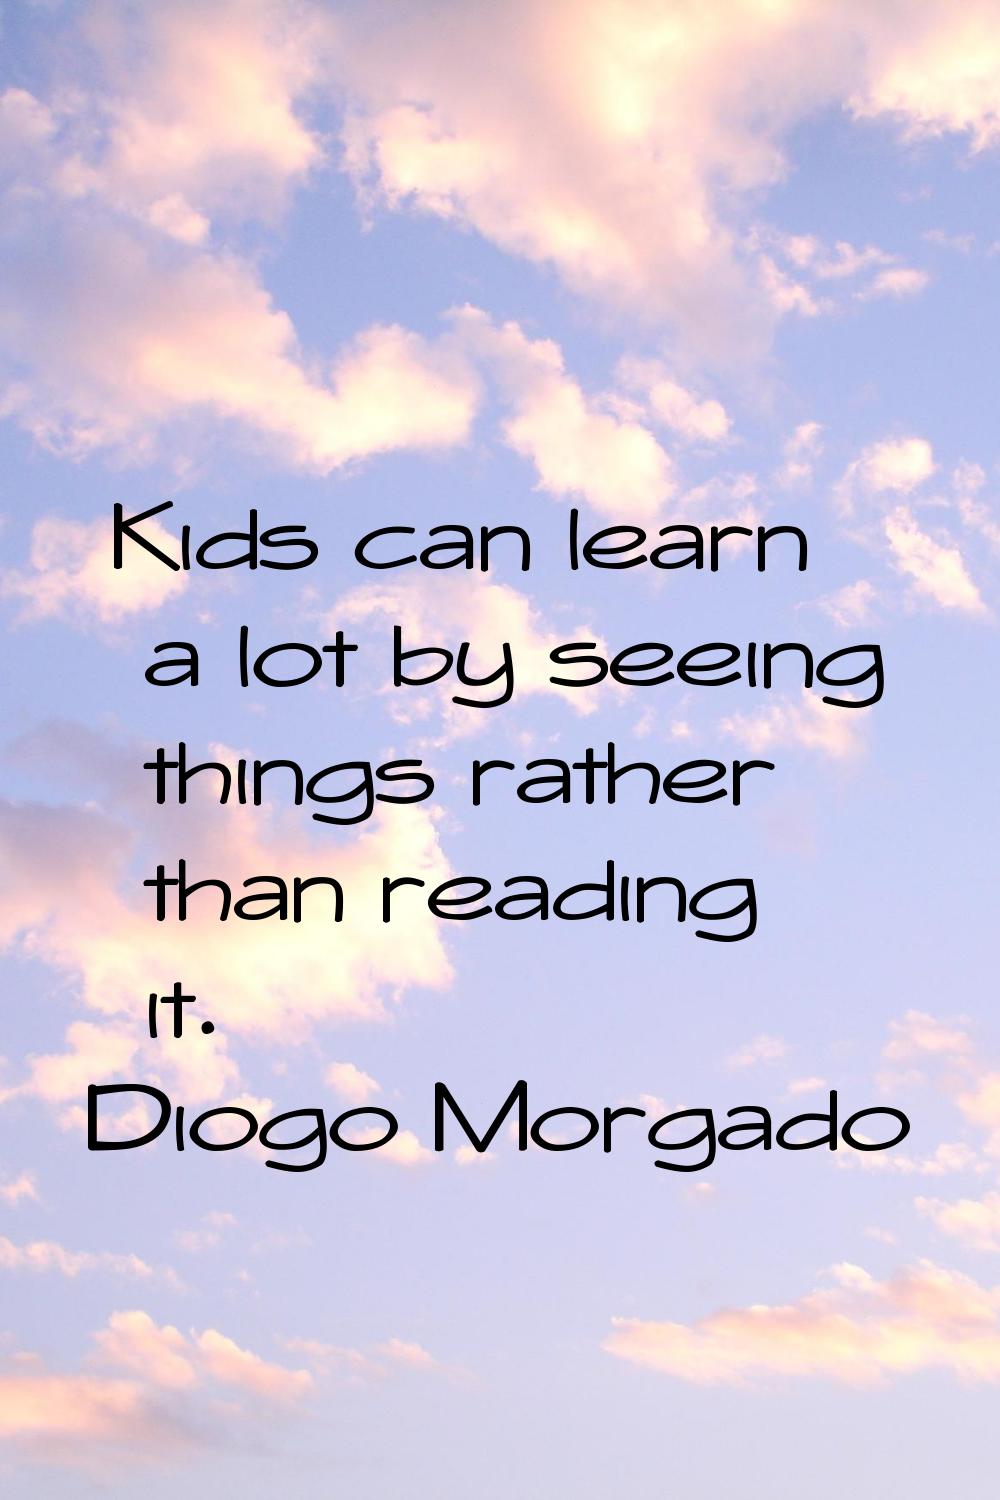 Kids can learn a lot by seeing things rather than reading it.